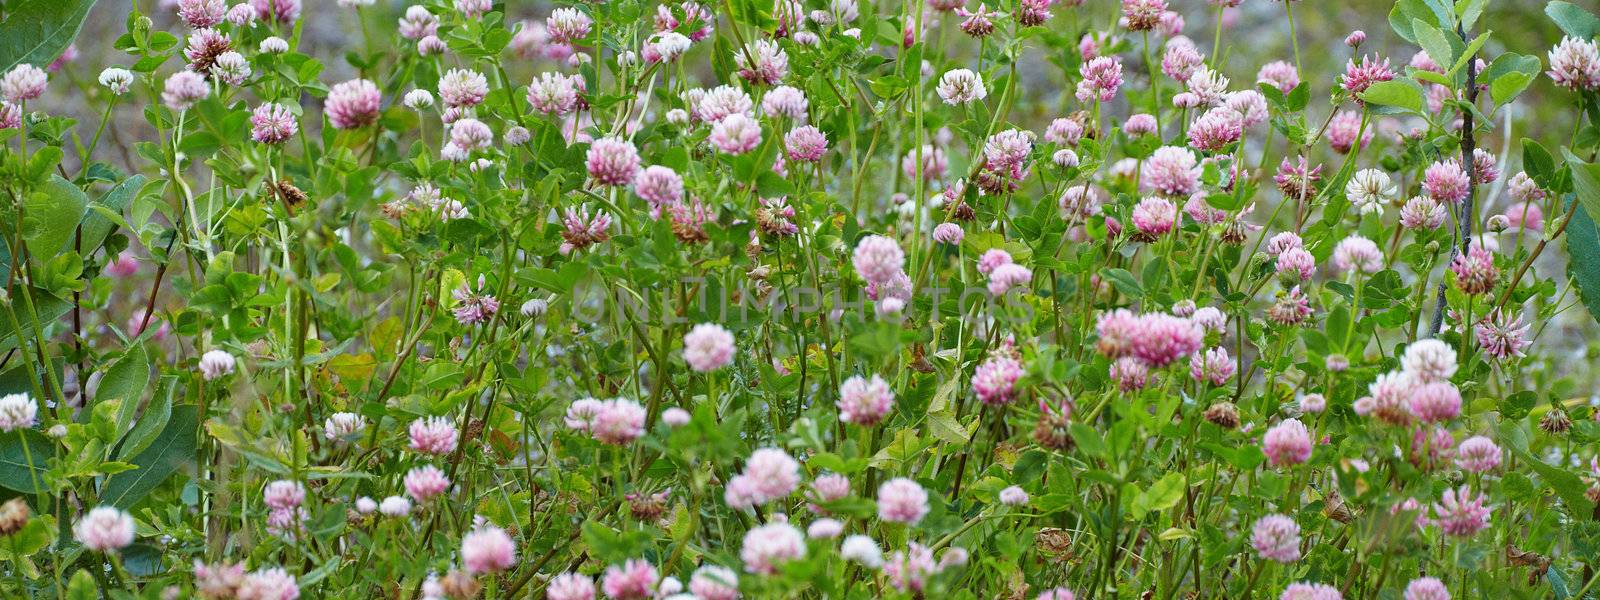 Panoramic photo - meadow covered with flowering clover